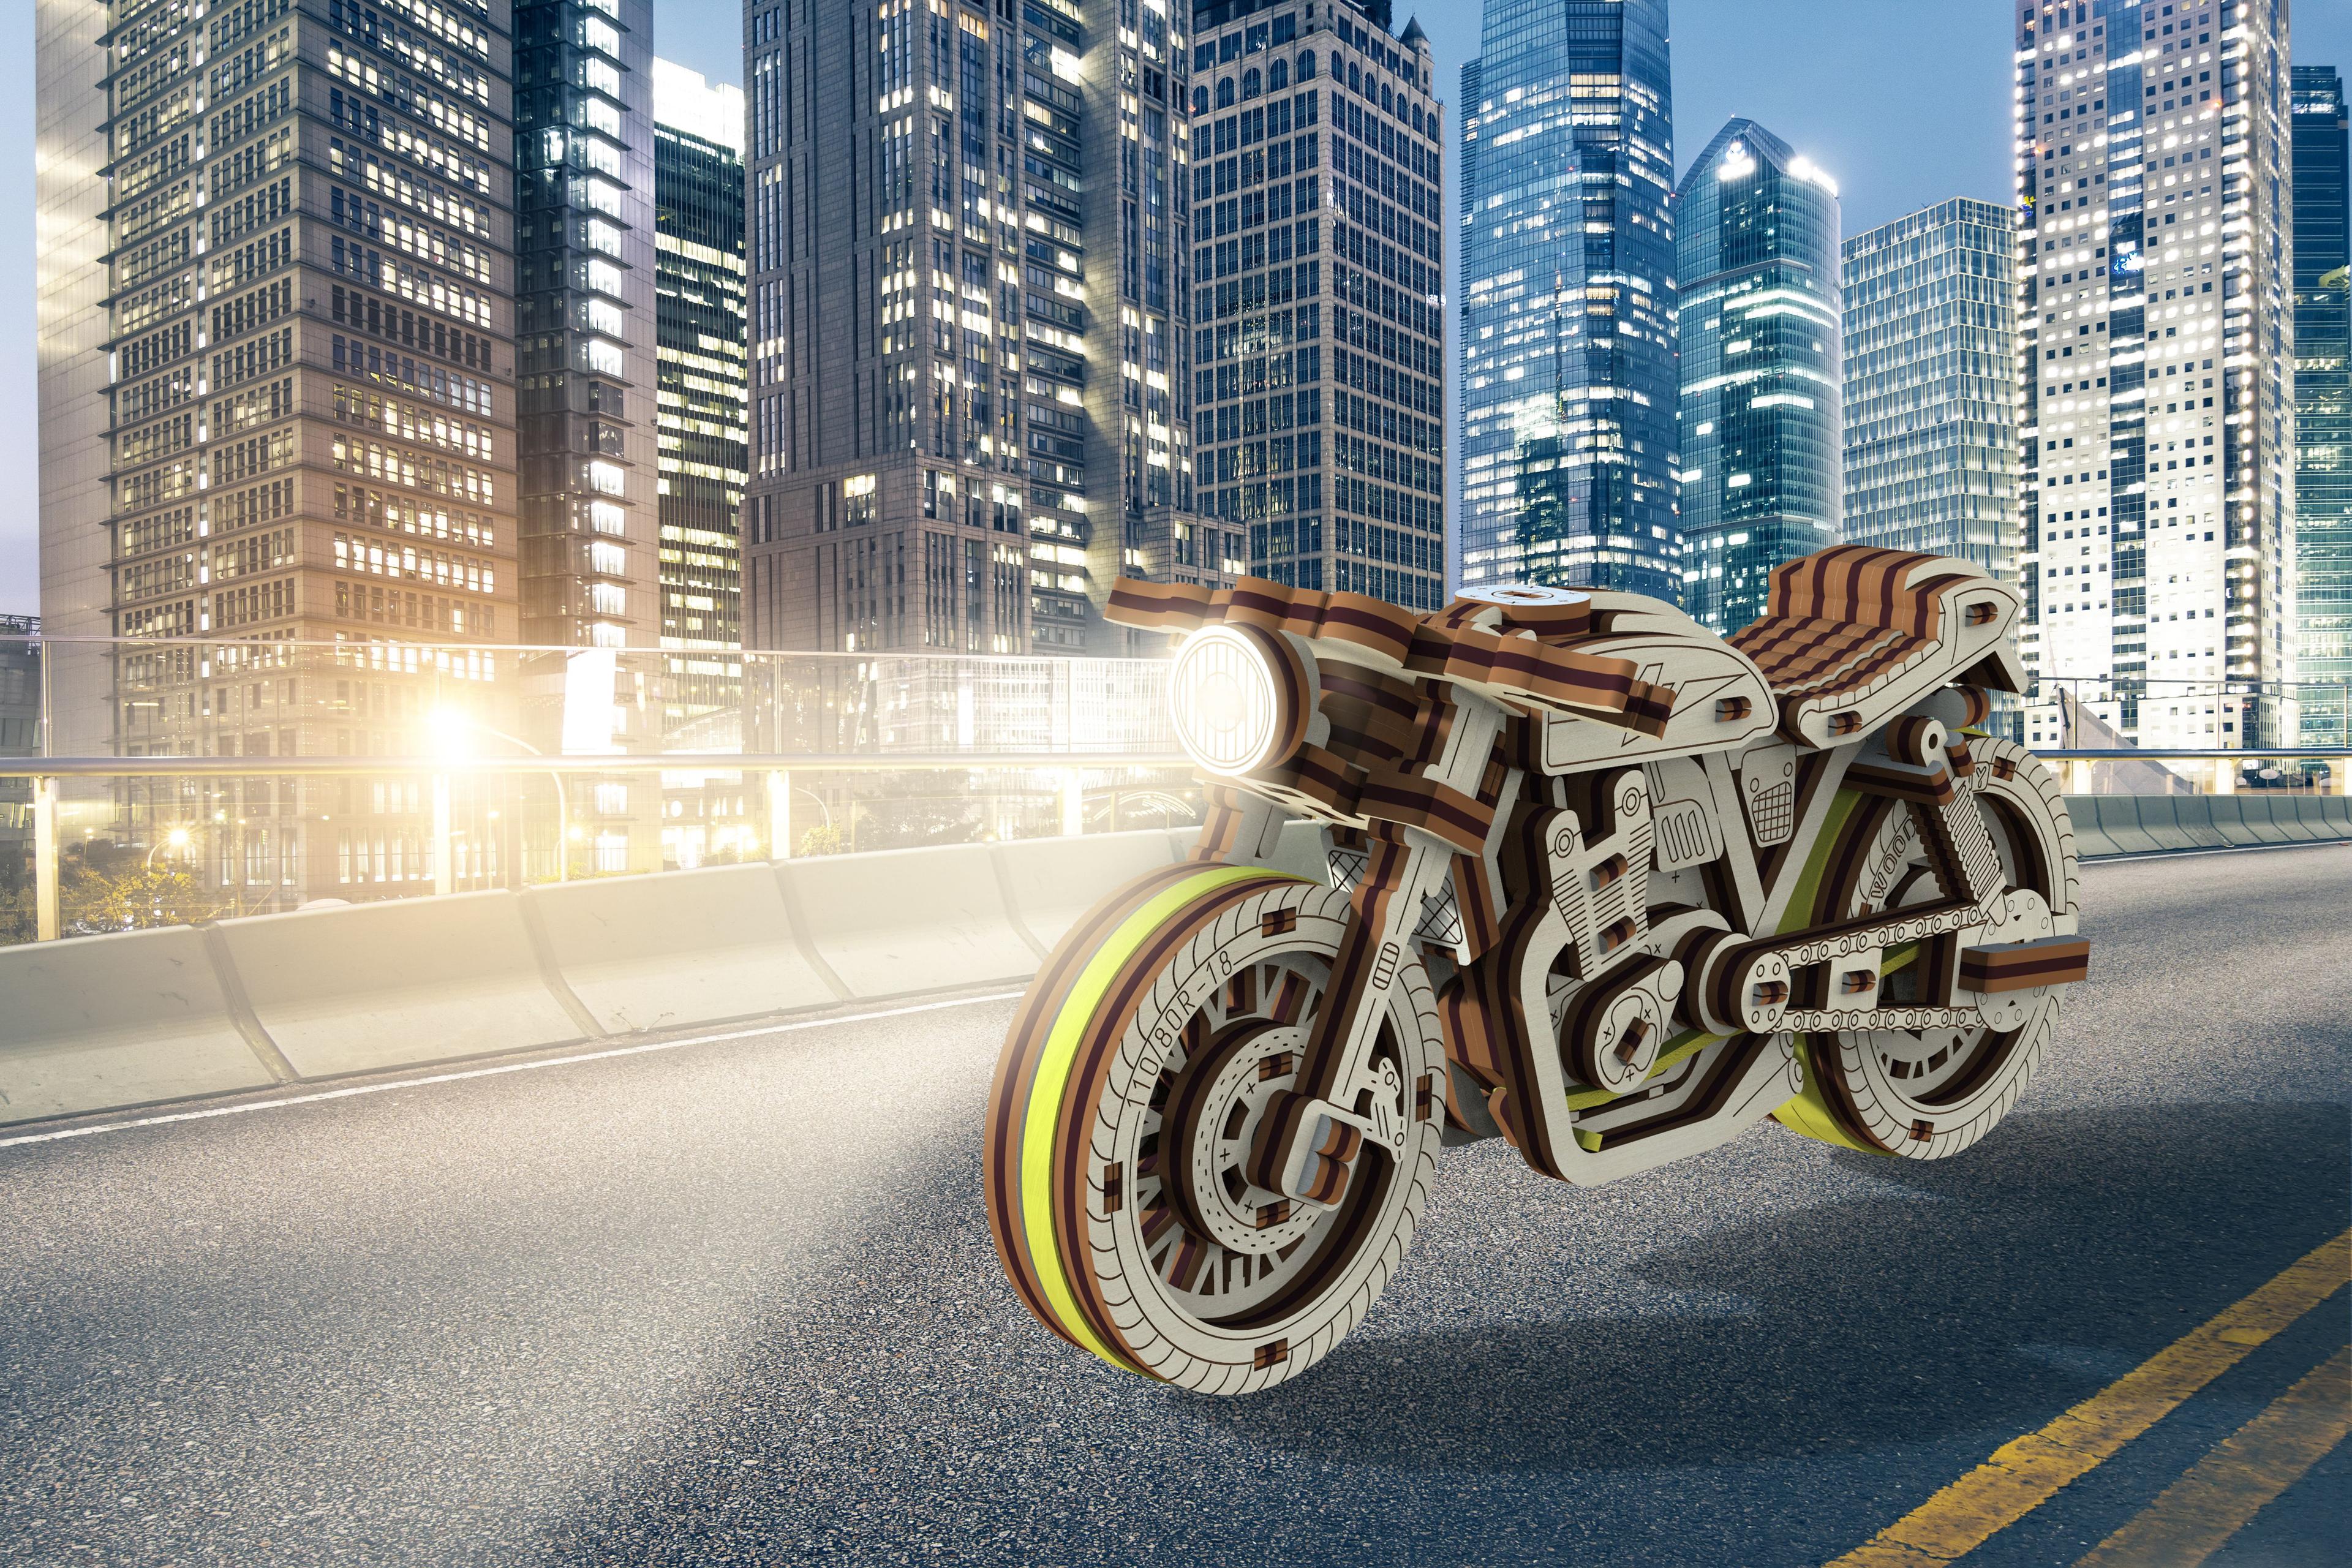 Wooden 3D Puzzle - Cafe Racer Motorcycle